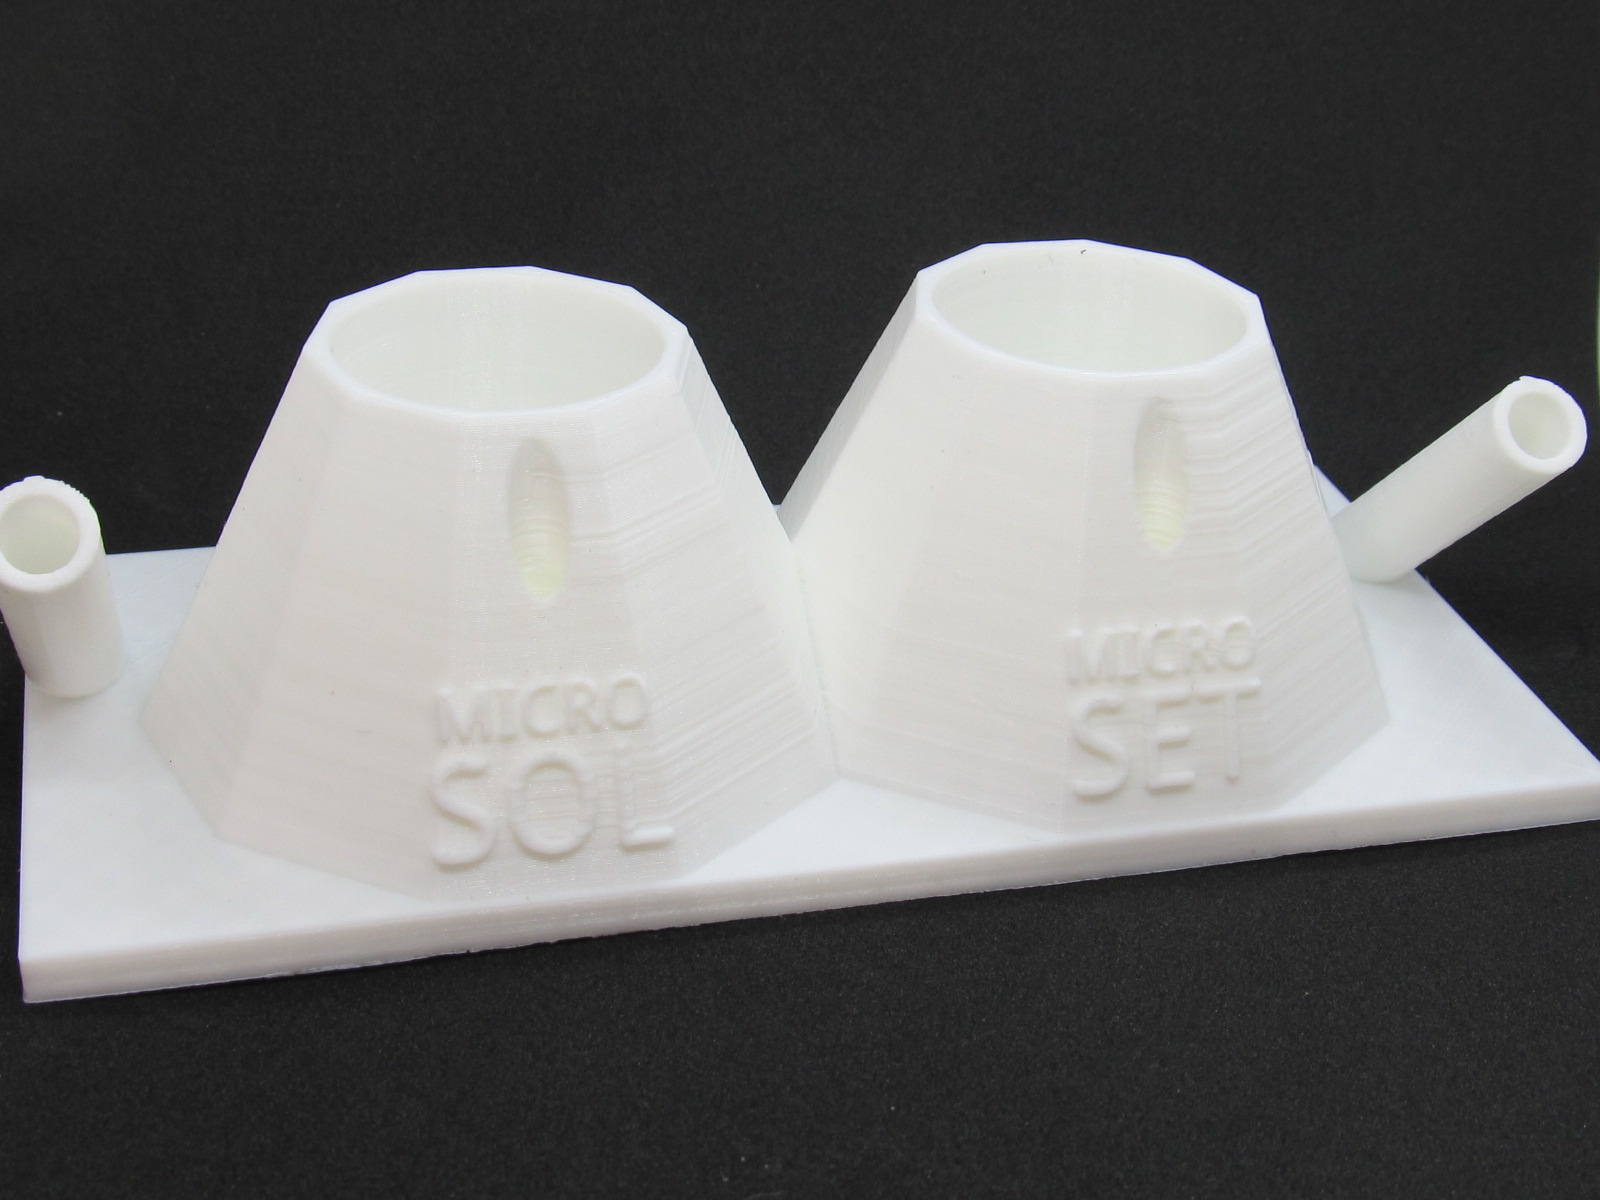 Oldsarges Aircraft Model blog: Making a Micro set and sol holder